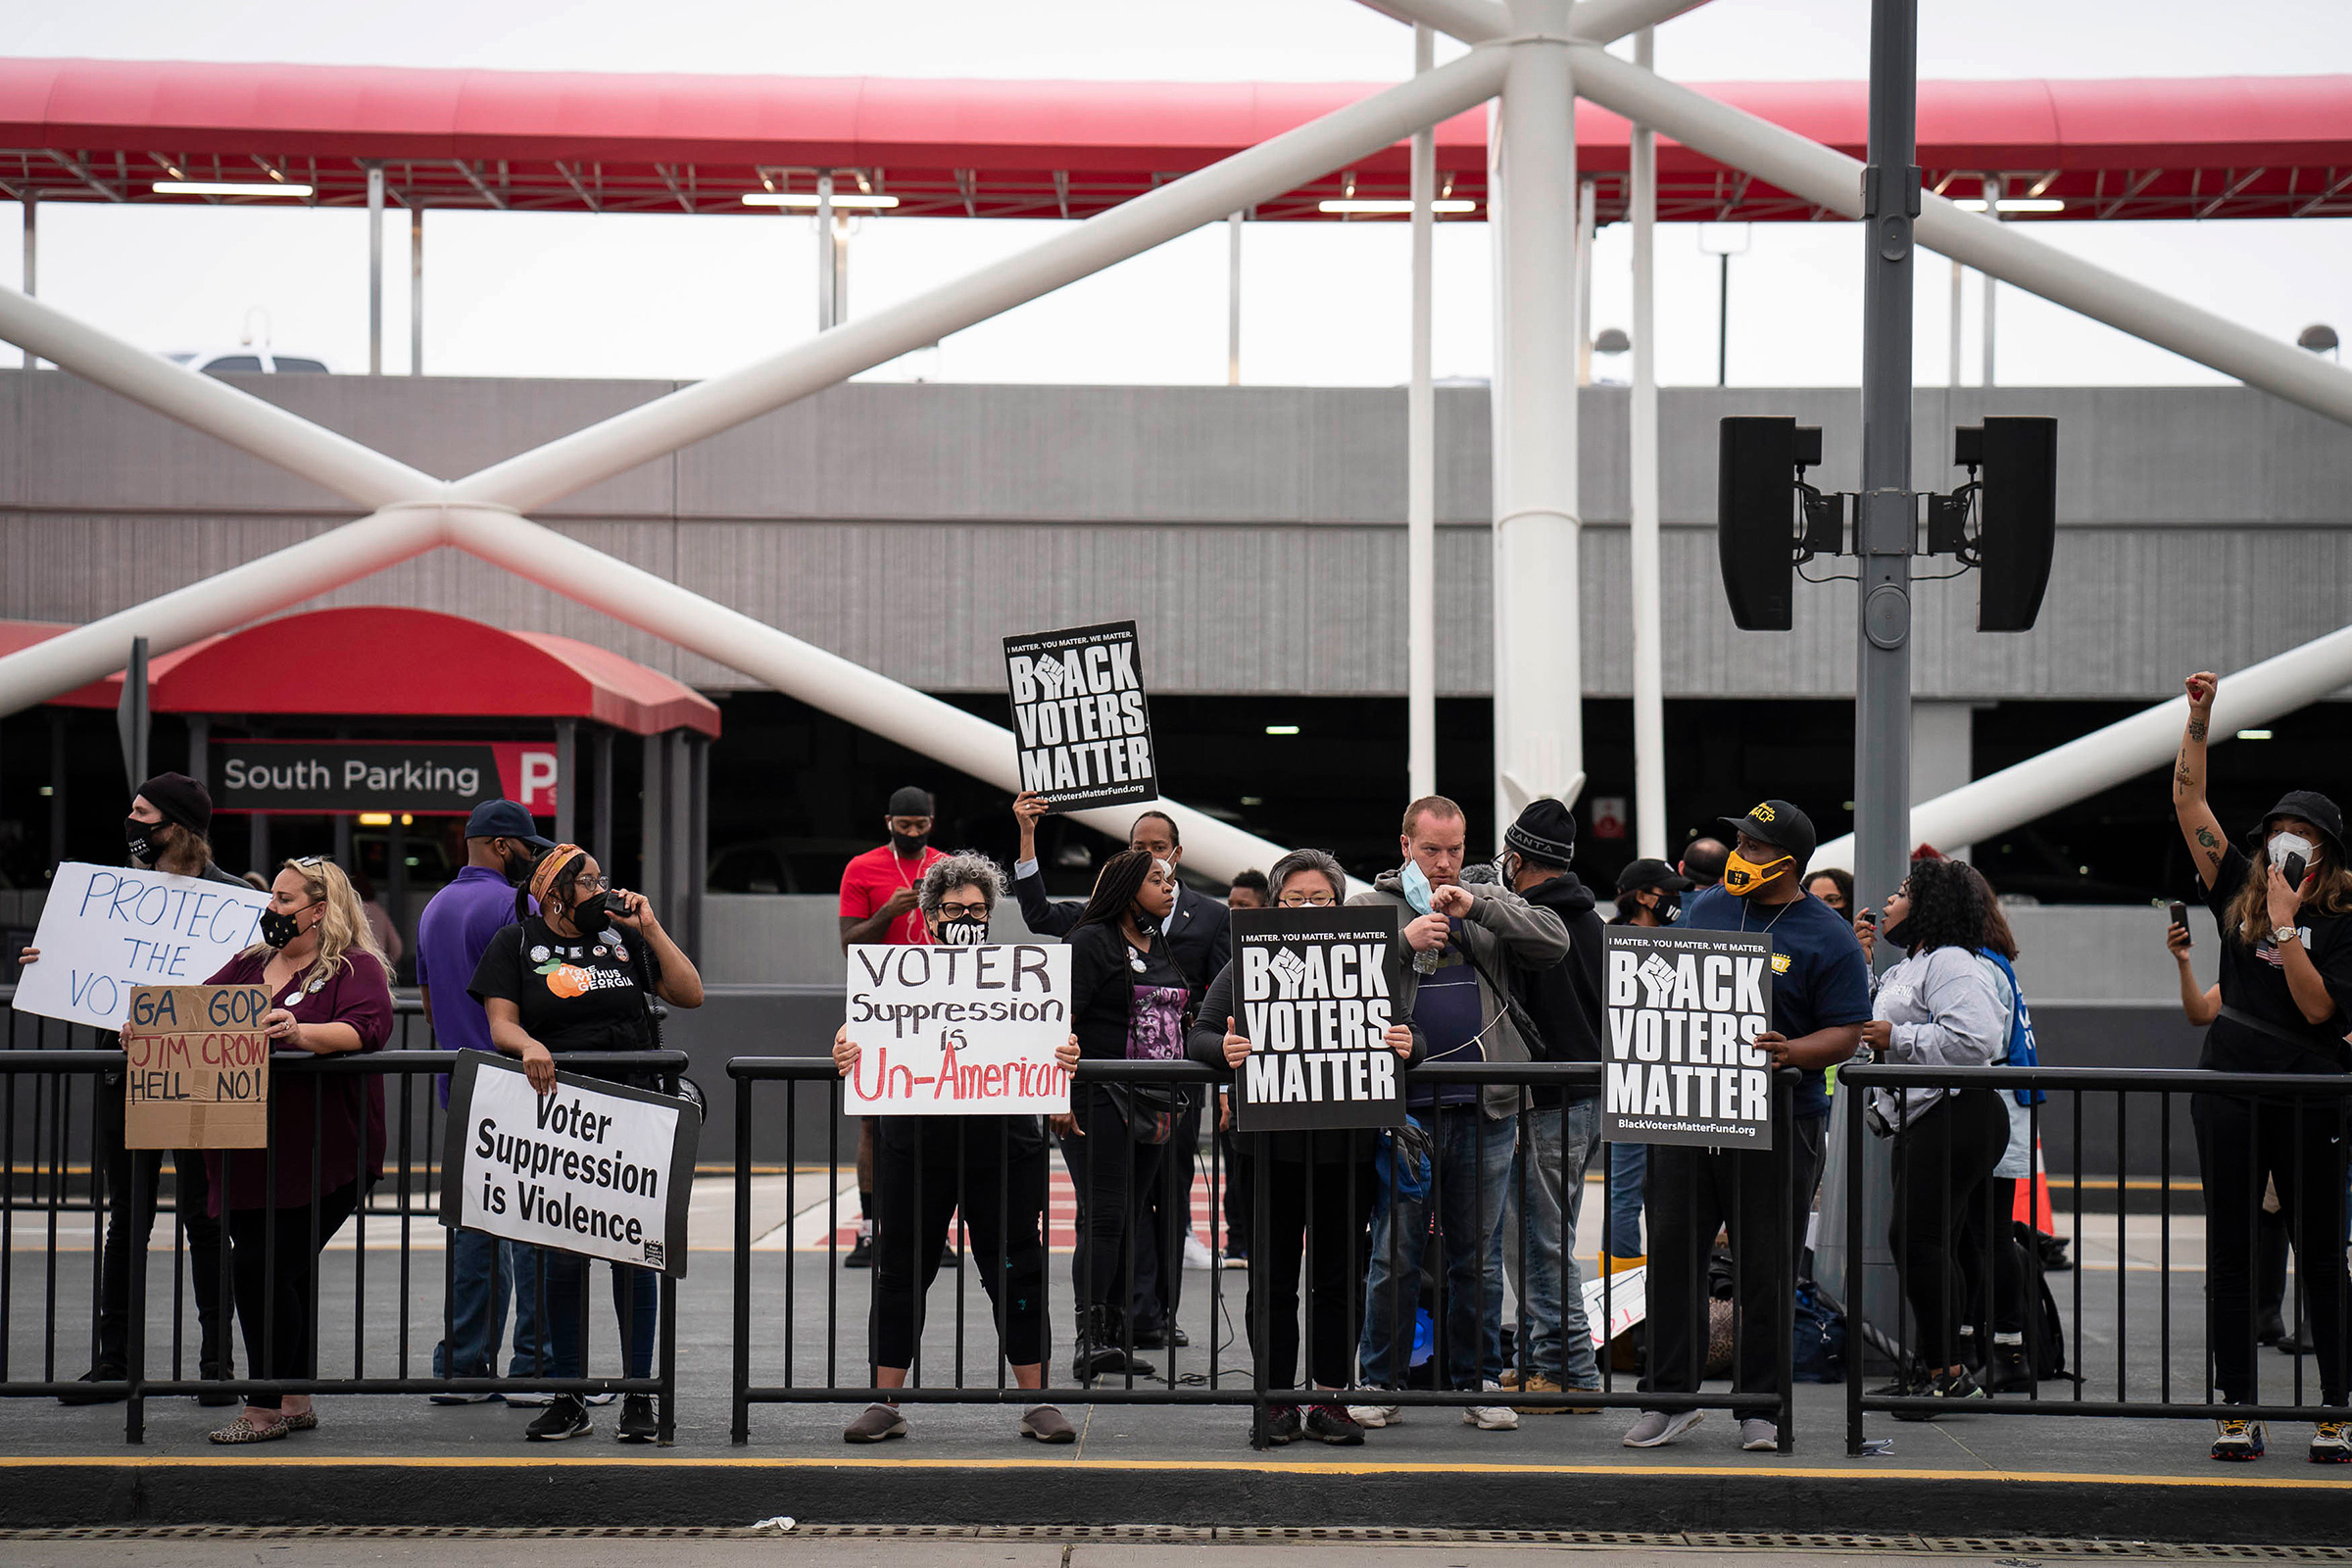 Voting-rights activists call for a boycott of Delta Air Lines during a protest at Hartsfield-Jackson Atlanta International Airport in Atlanta, March 25, 2021. (Nicole Craine/The New York Times)